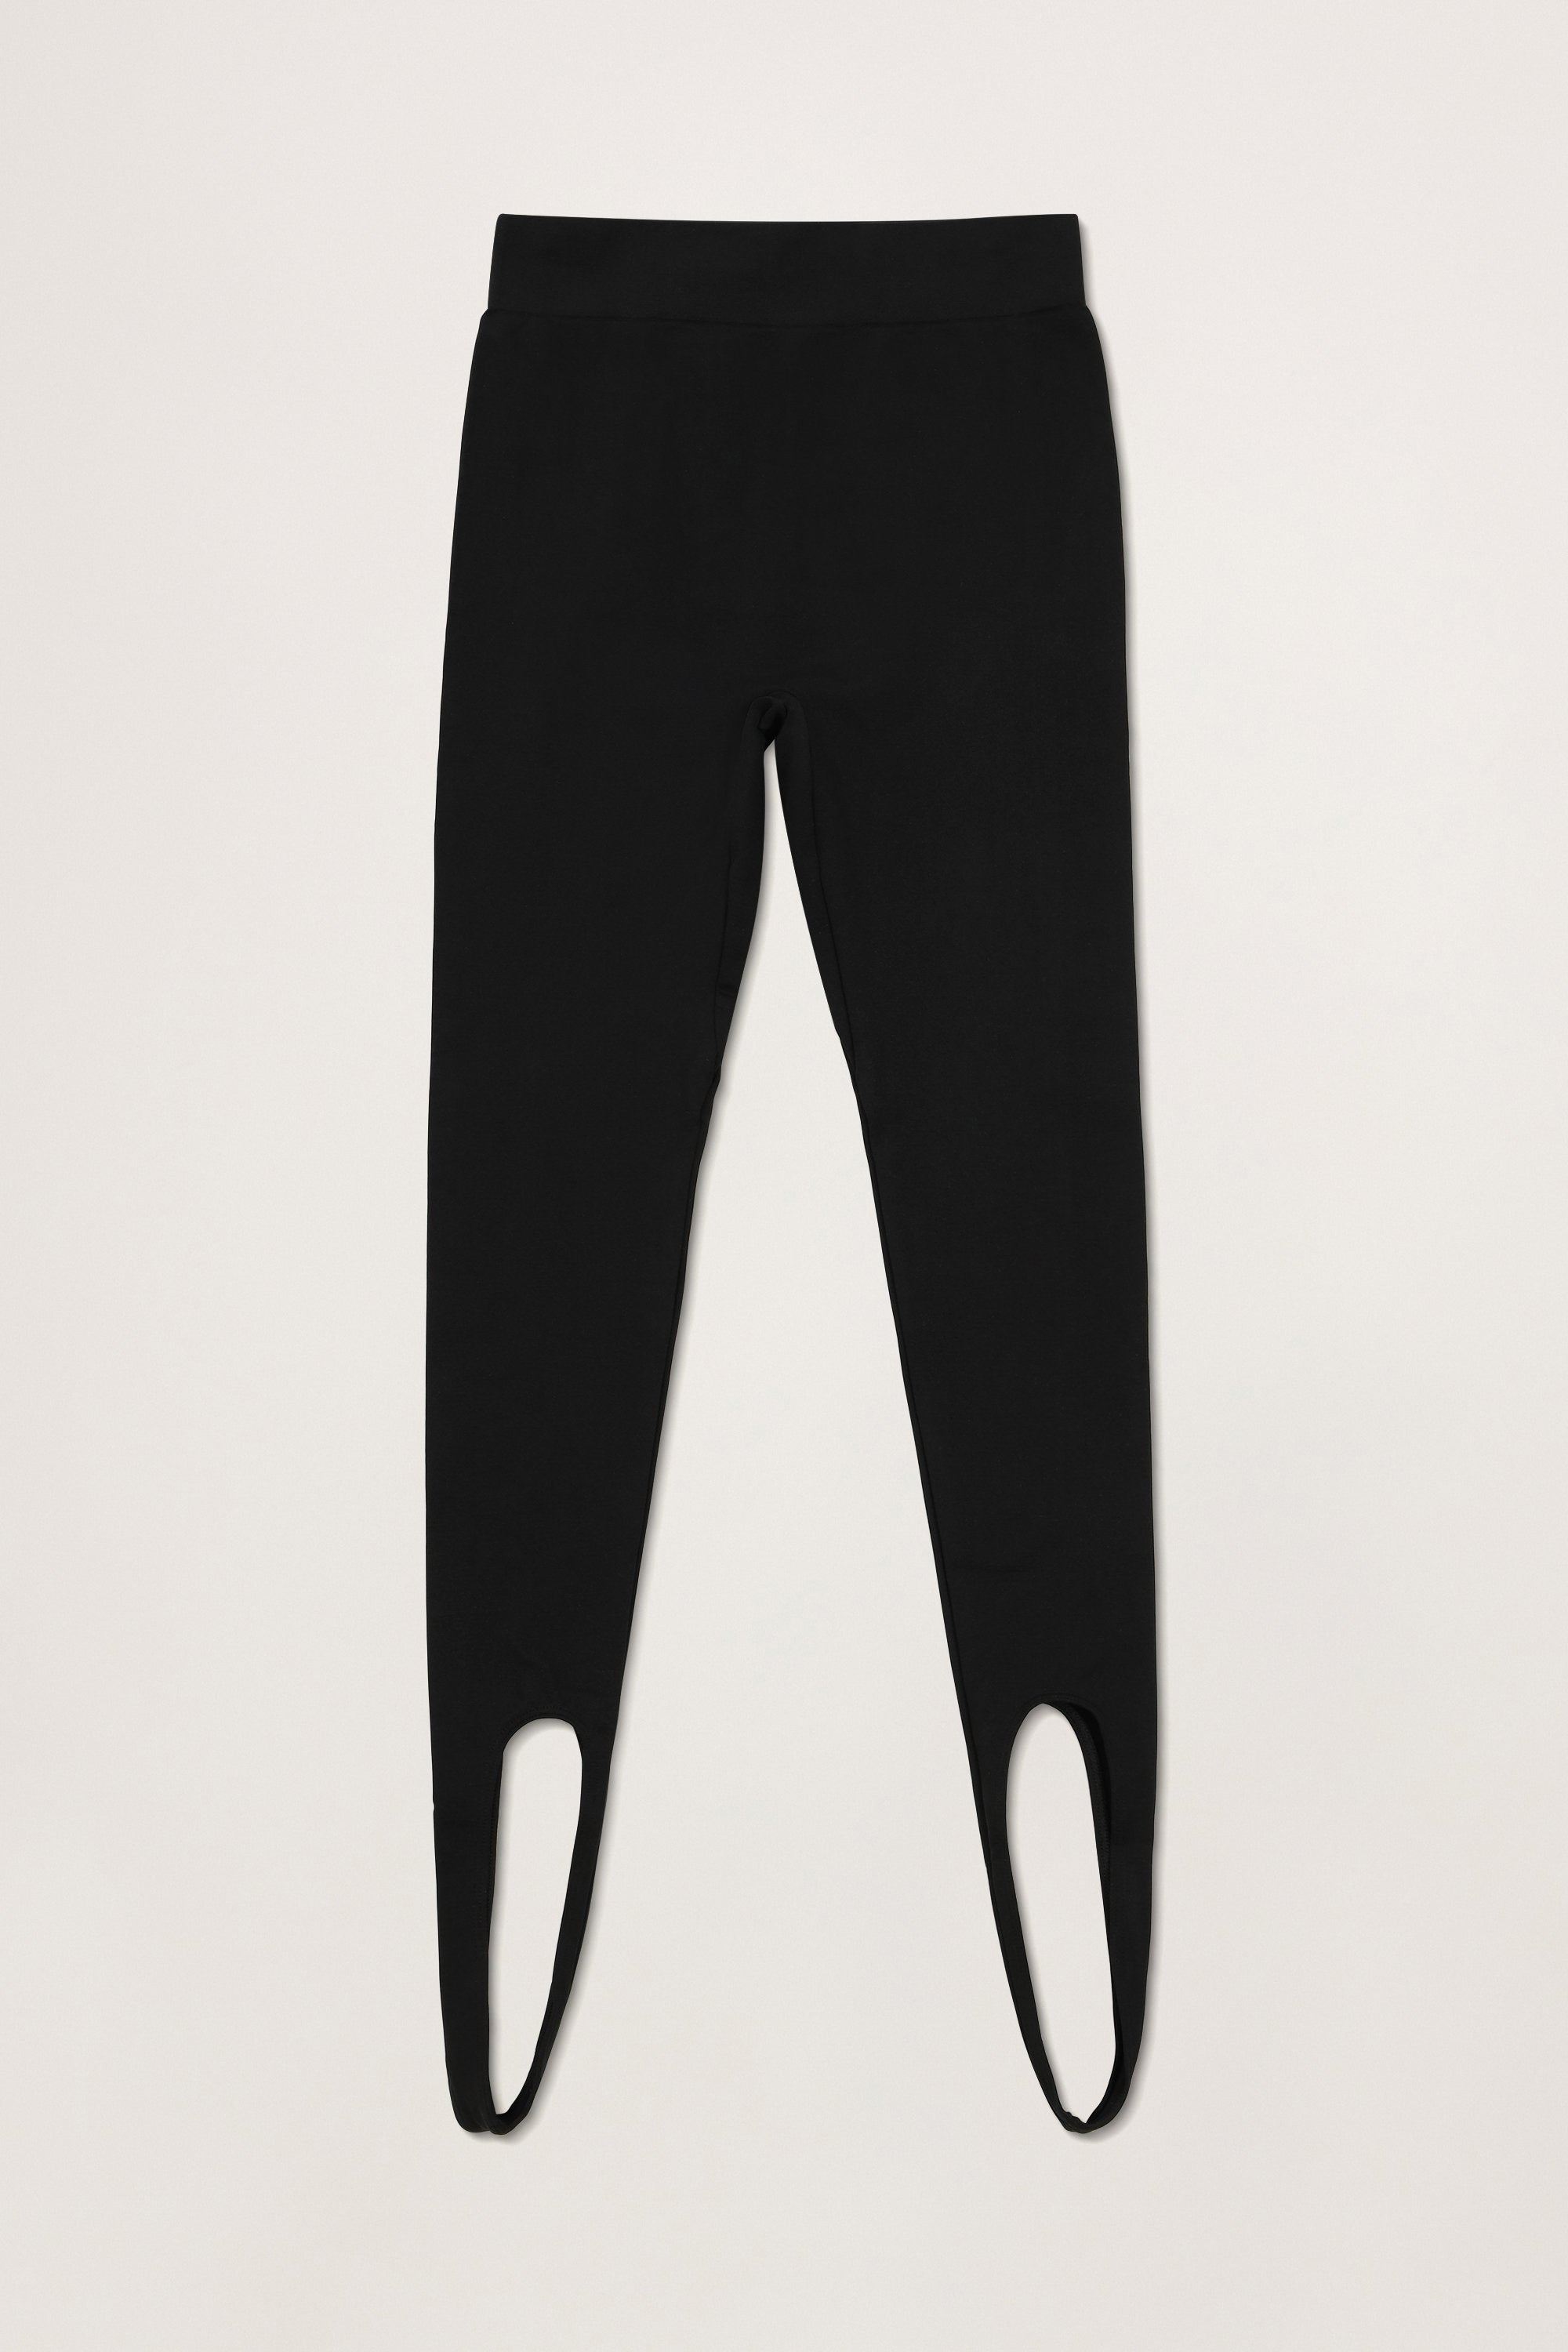 Womens Soft Black Angel Wings Stretch Leggings💋 – Tack-M-Up Stables